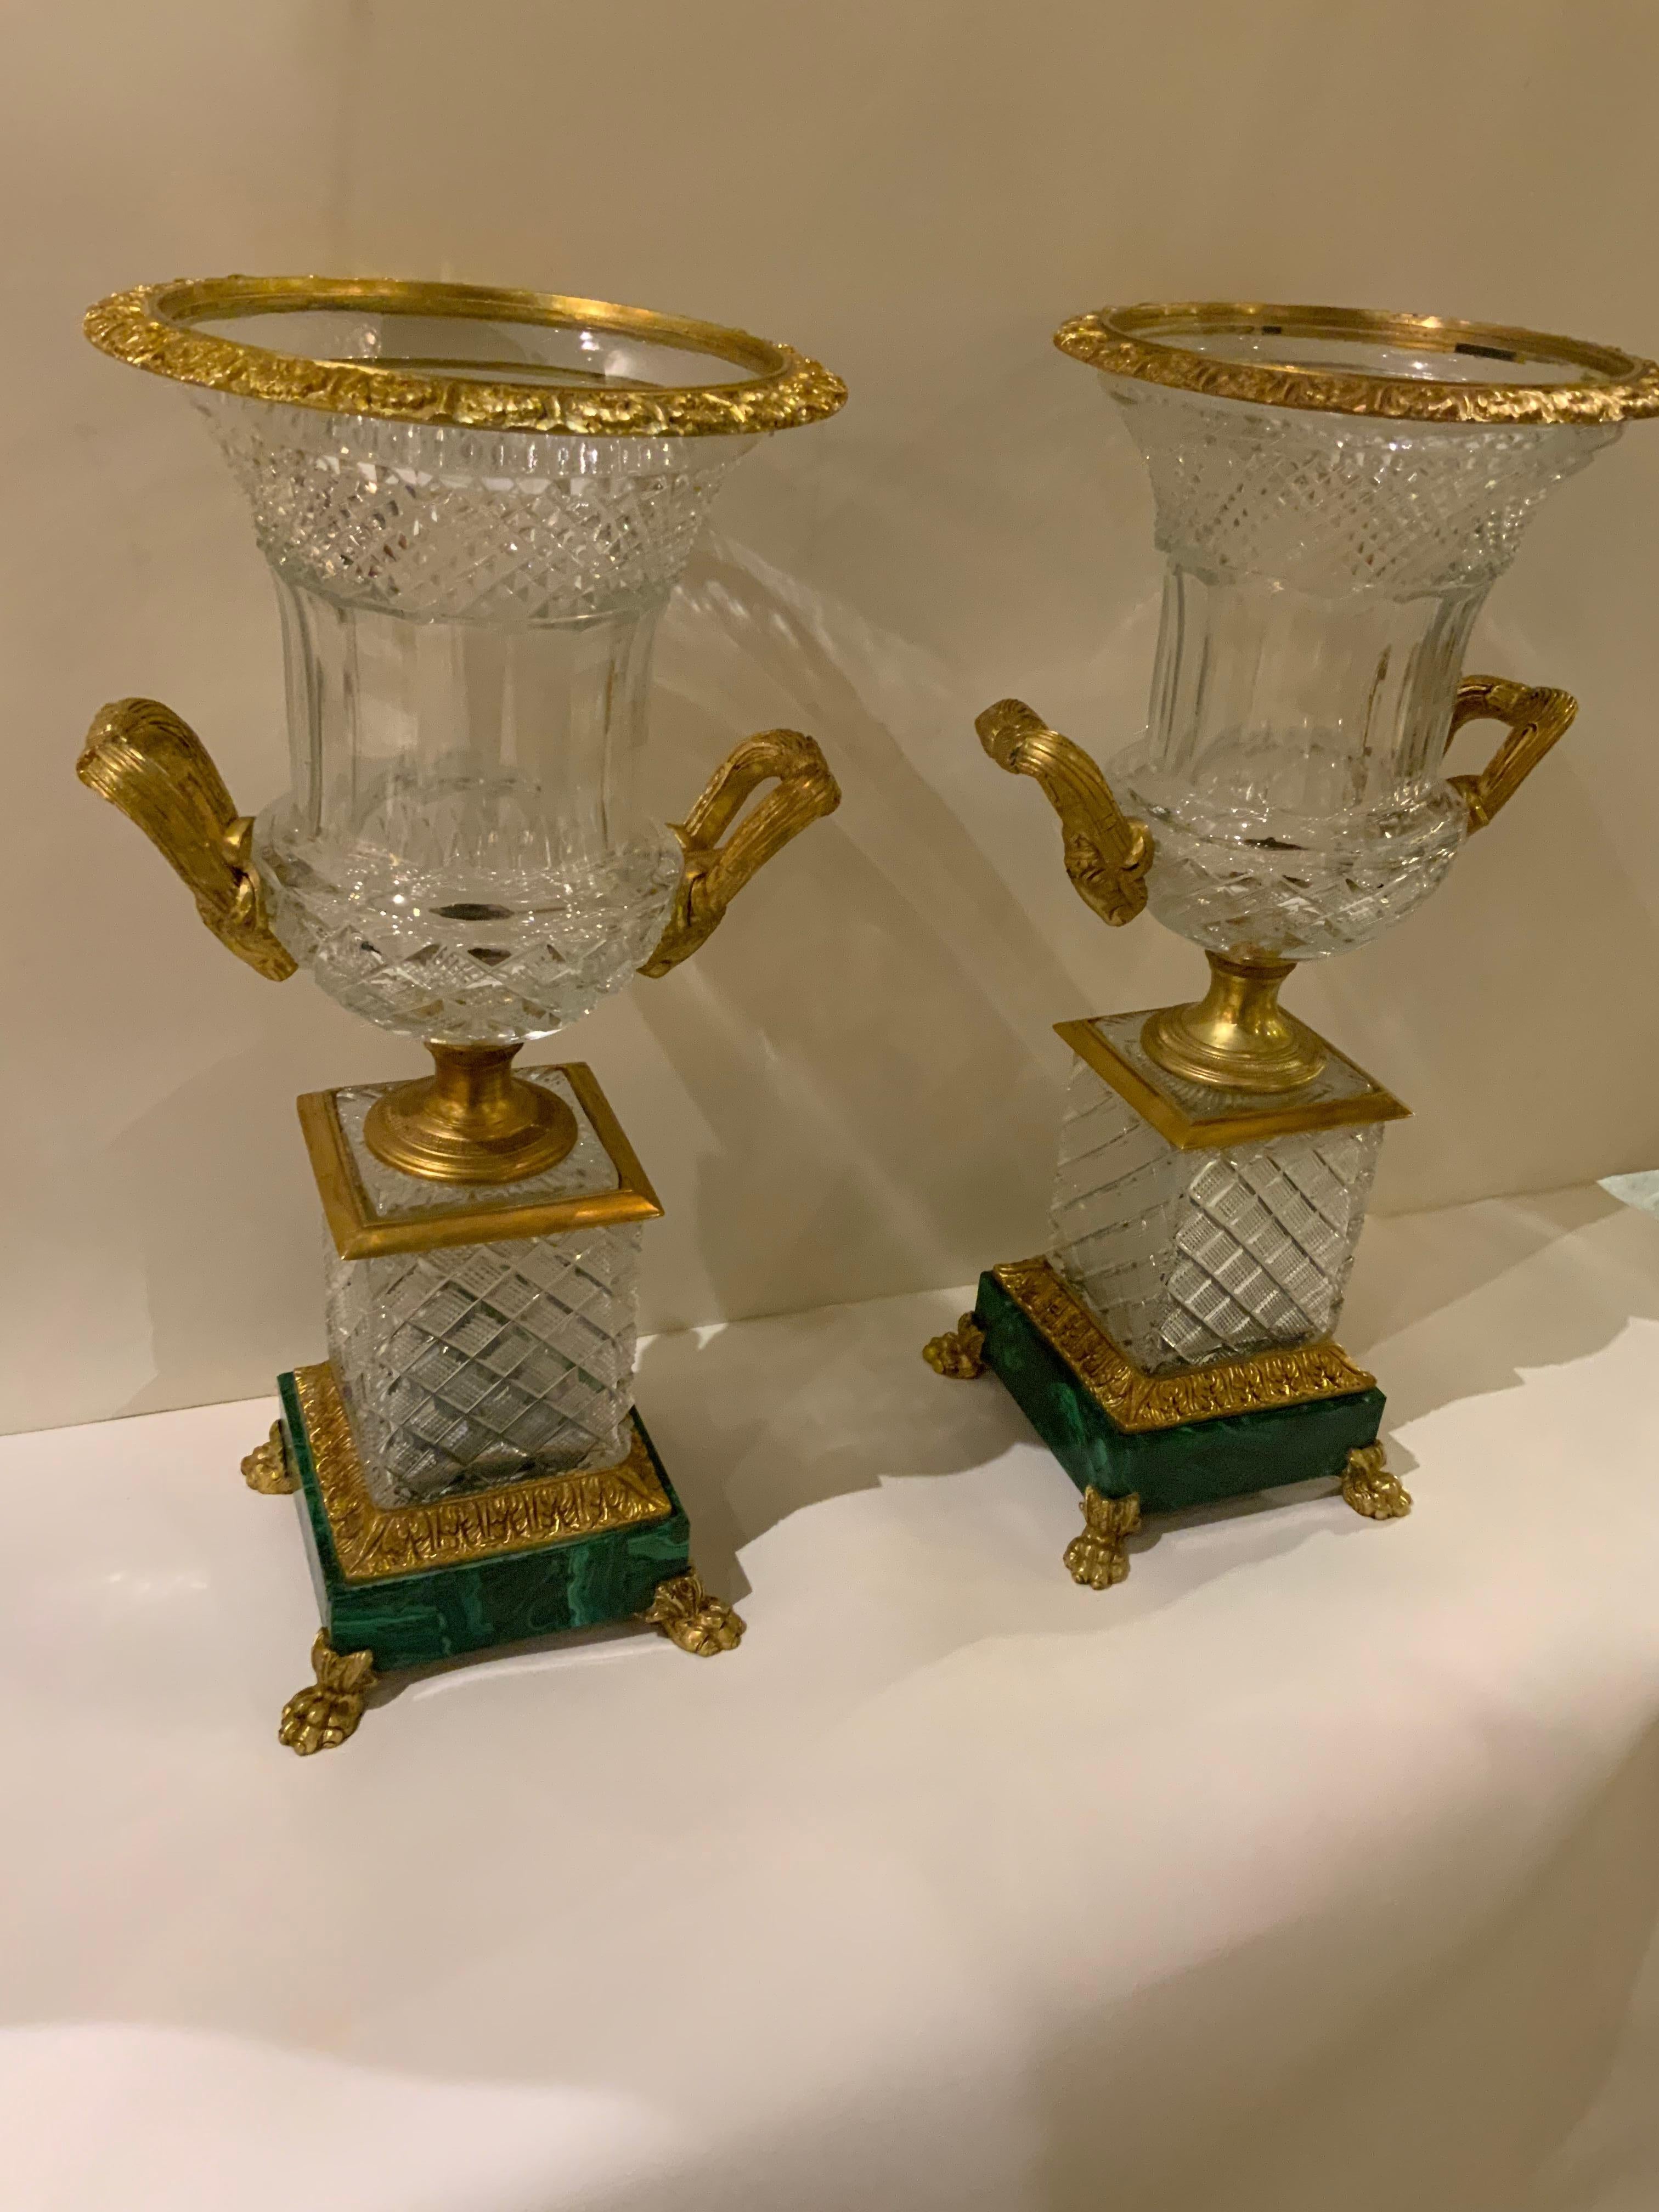 20th Century Pair of French Baccarat Style Cut Crystal Urns, Bronze Dore Mounts on Malachite